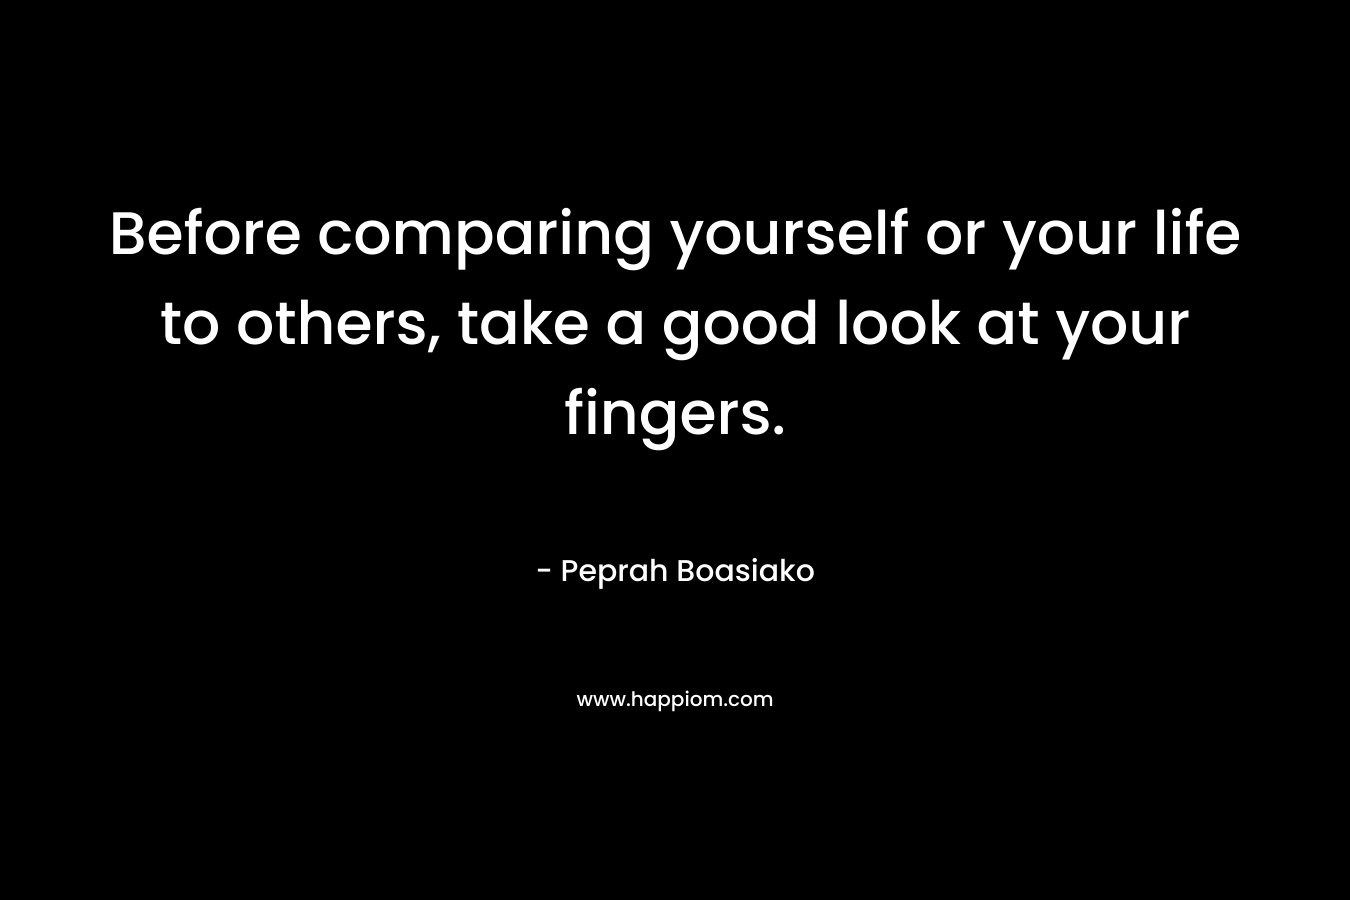 Before comparing yourself or your life to others, take a good look at your fingers. – Peprah Boasiako